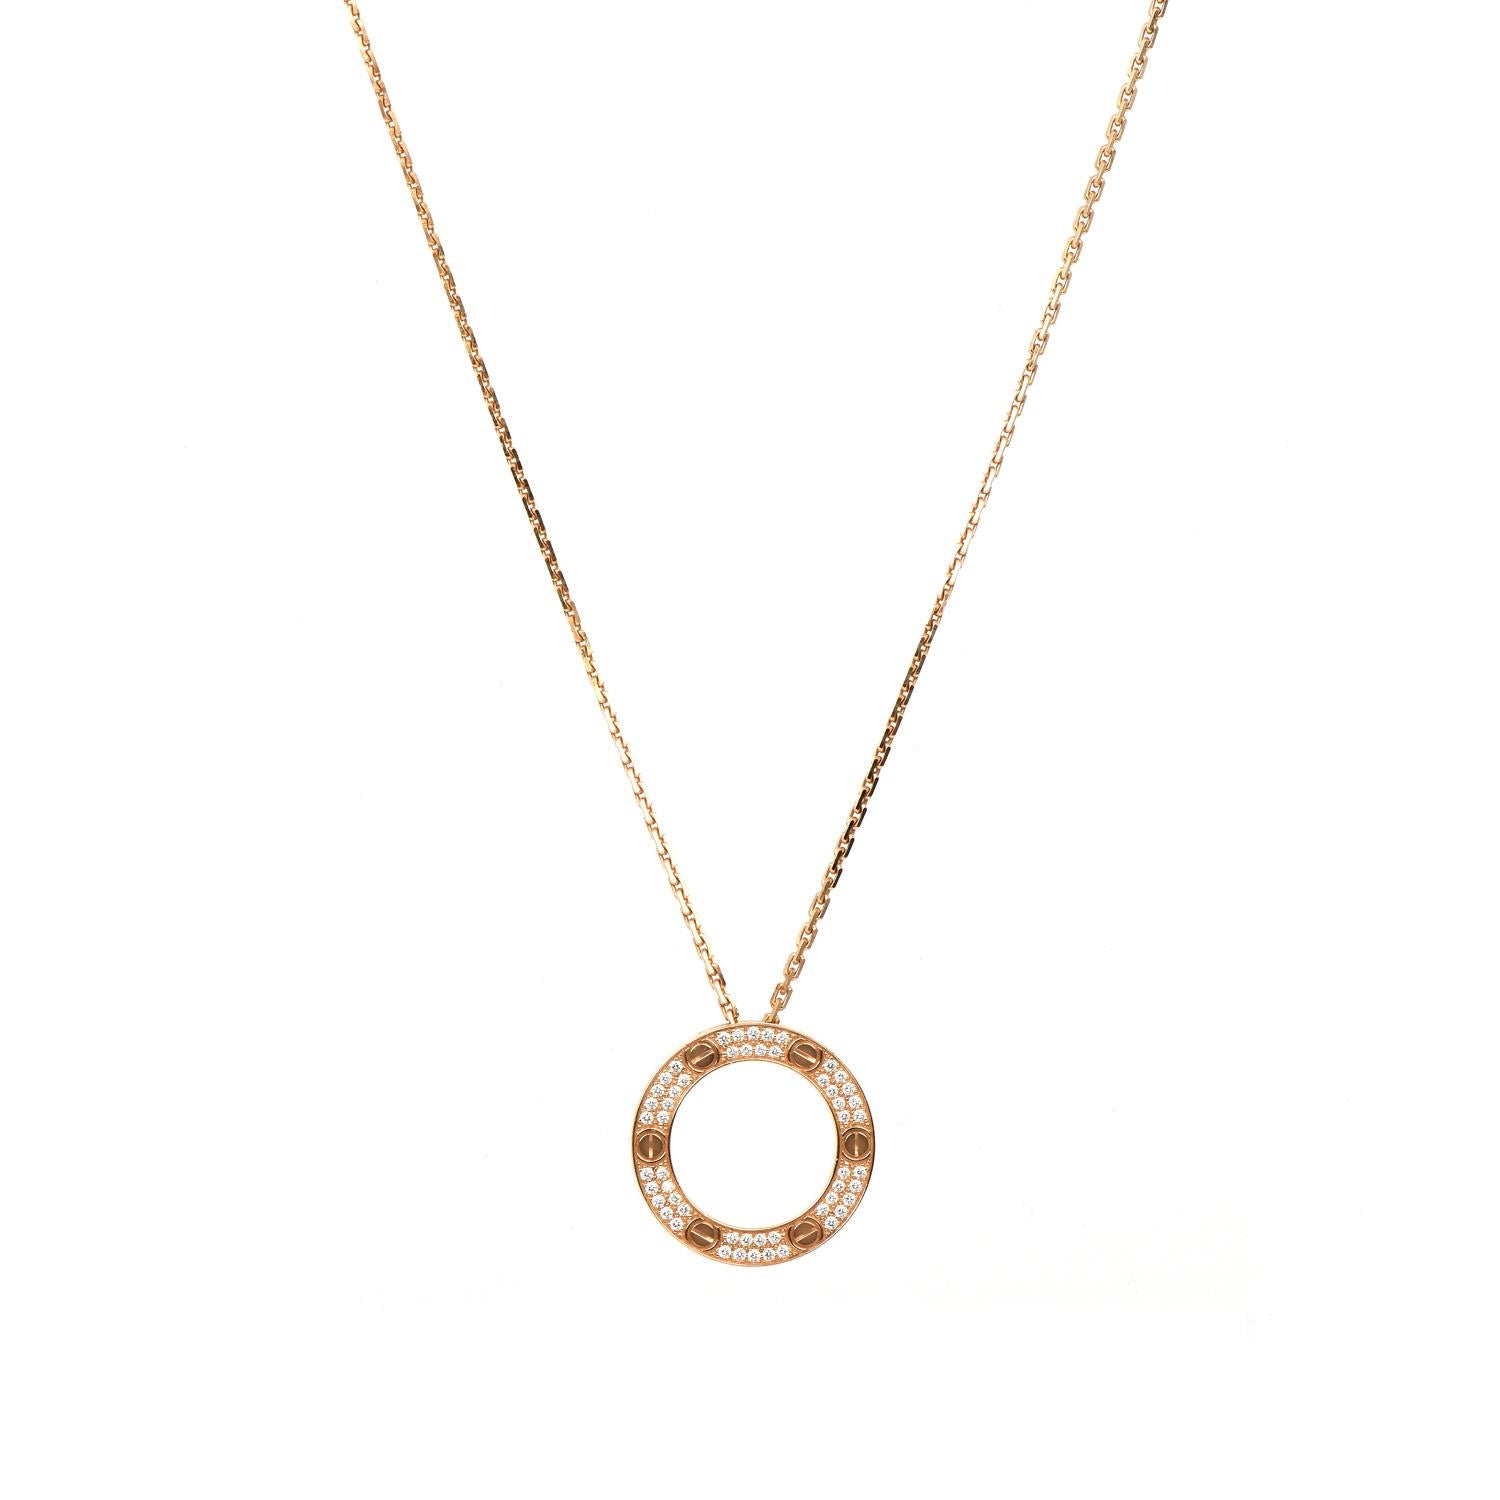 From the well-known House of Cartier, this estate LOVE Collection piece is an exquisite encounter between the classic & luxurious look.  

The round-shaped pendant & Chain are crafted in solid 18K Rose Gold. Adorning the pendant, there are 54